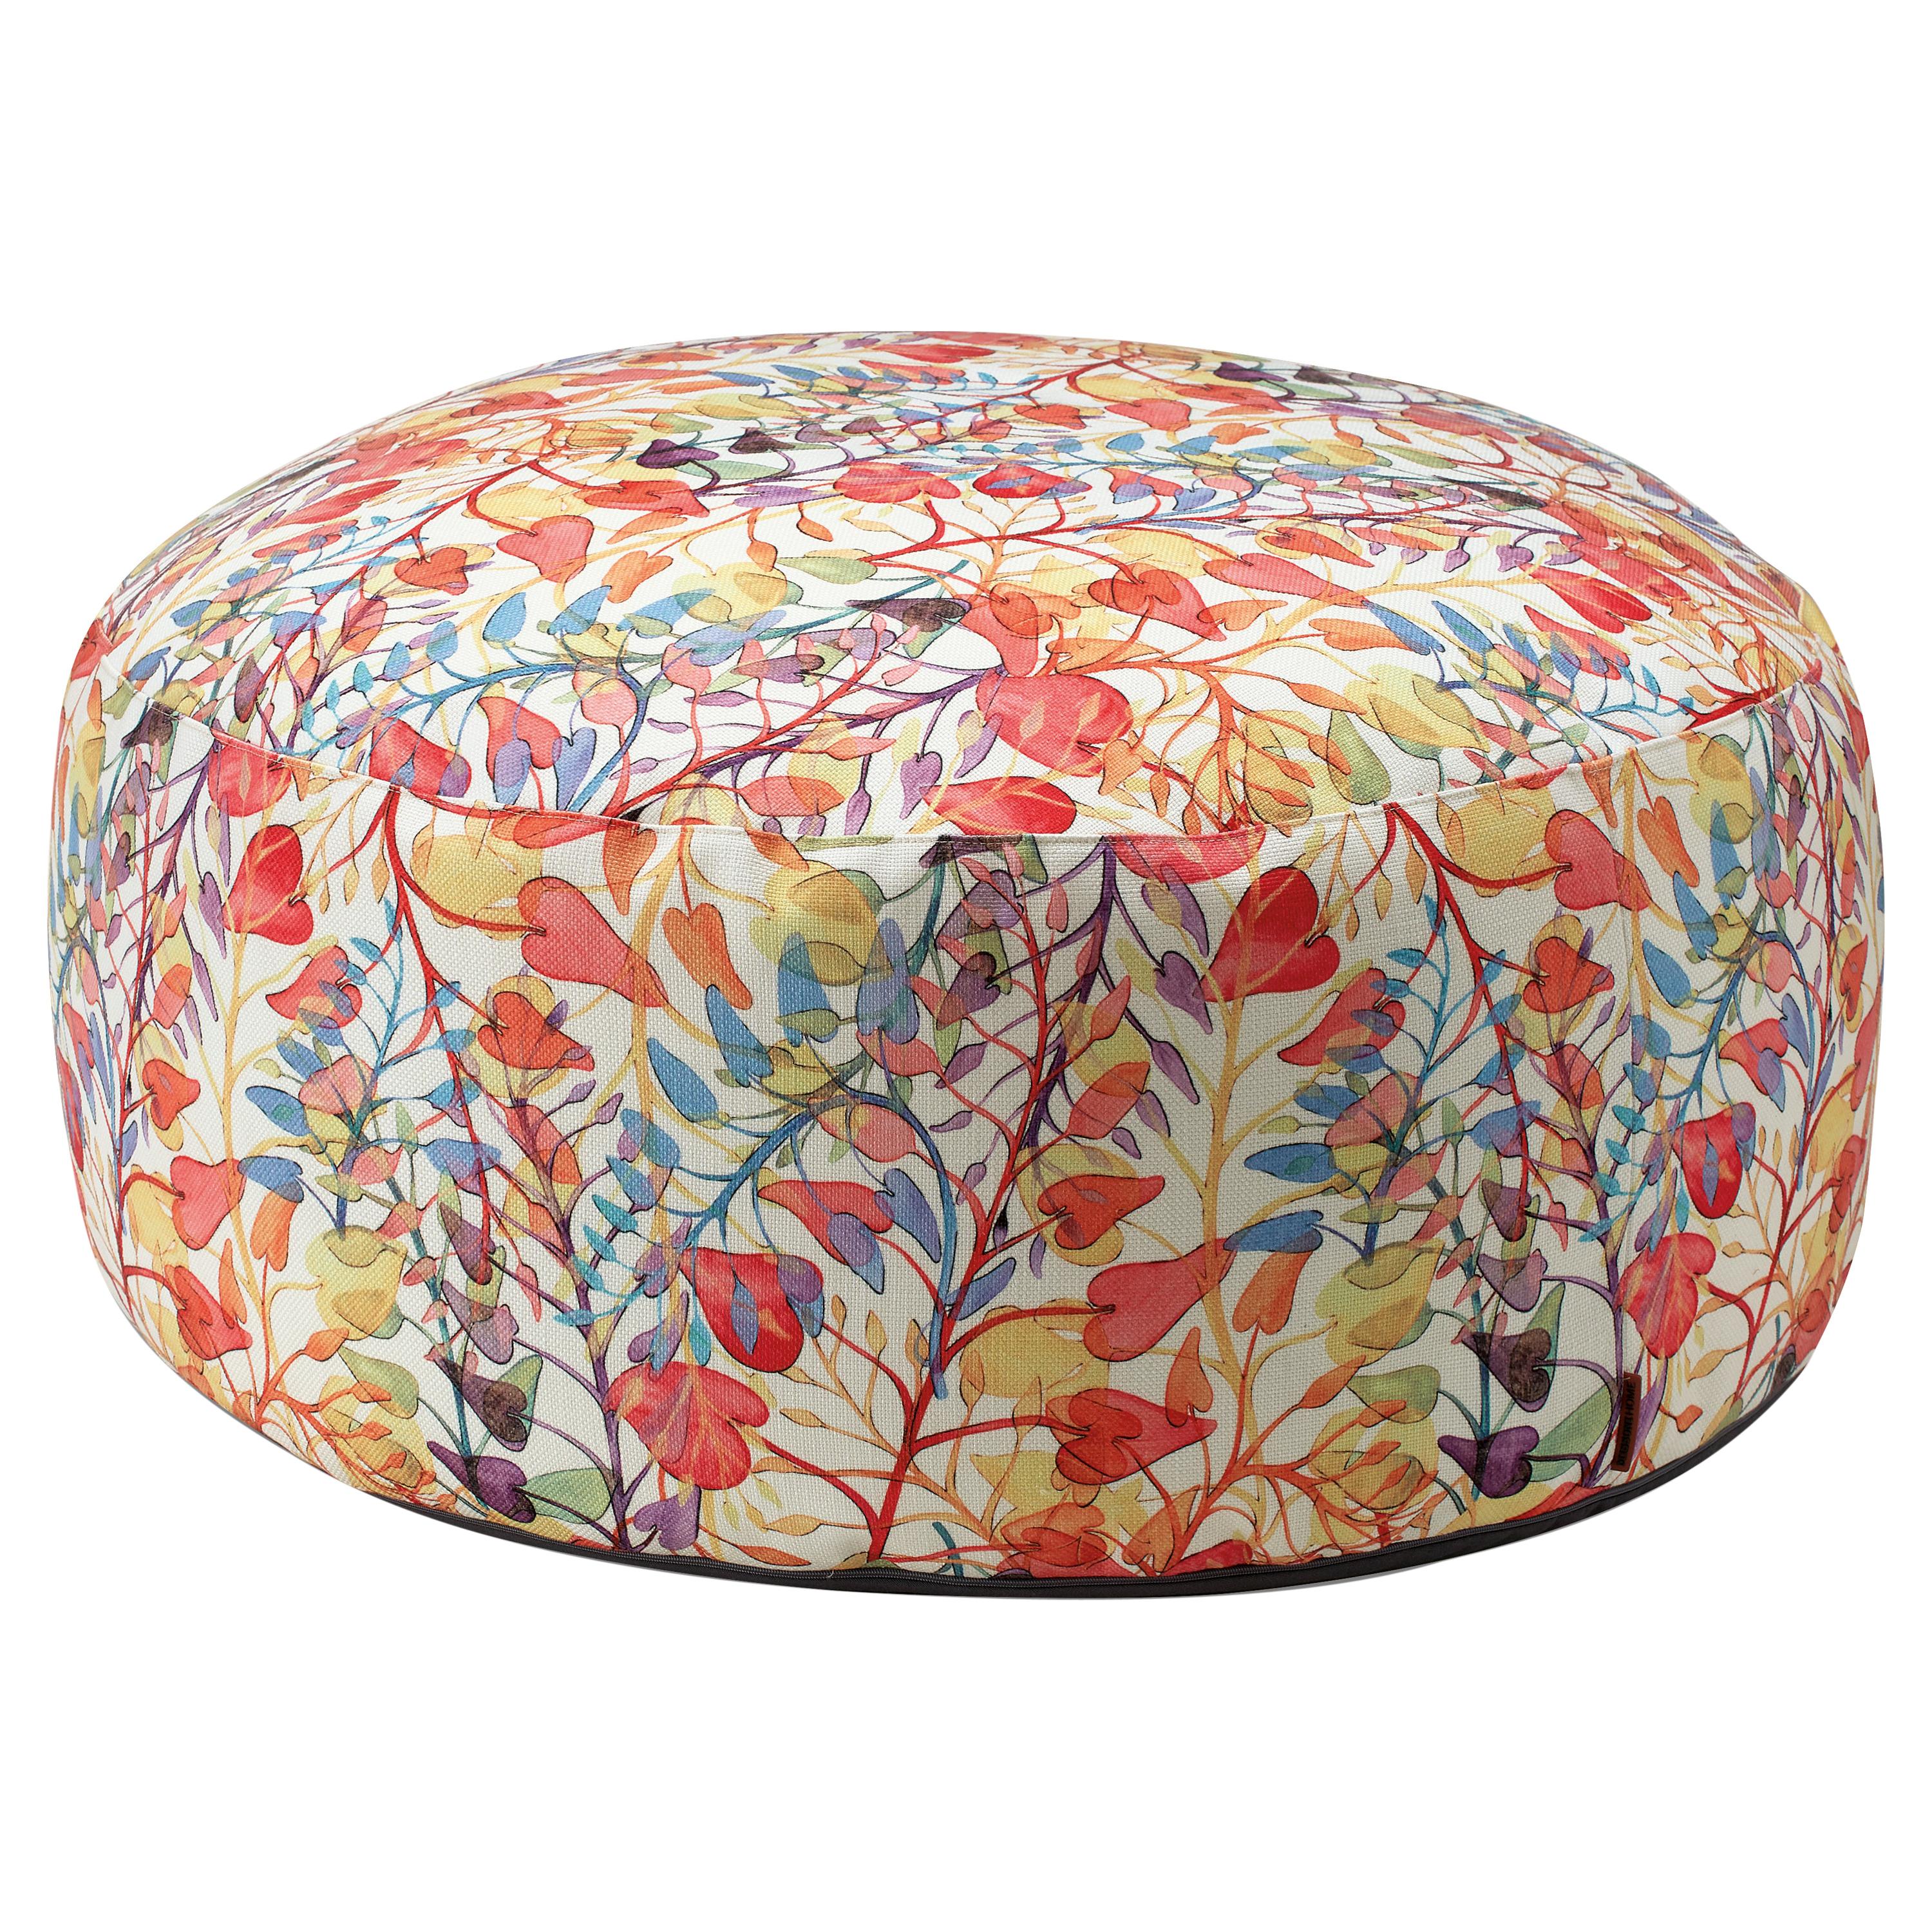 Antibes Pallina Pouf For Sale